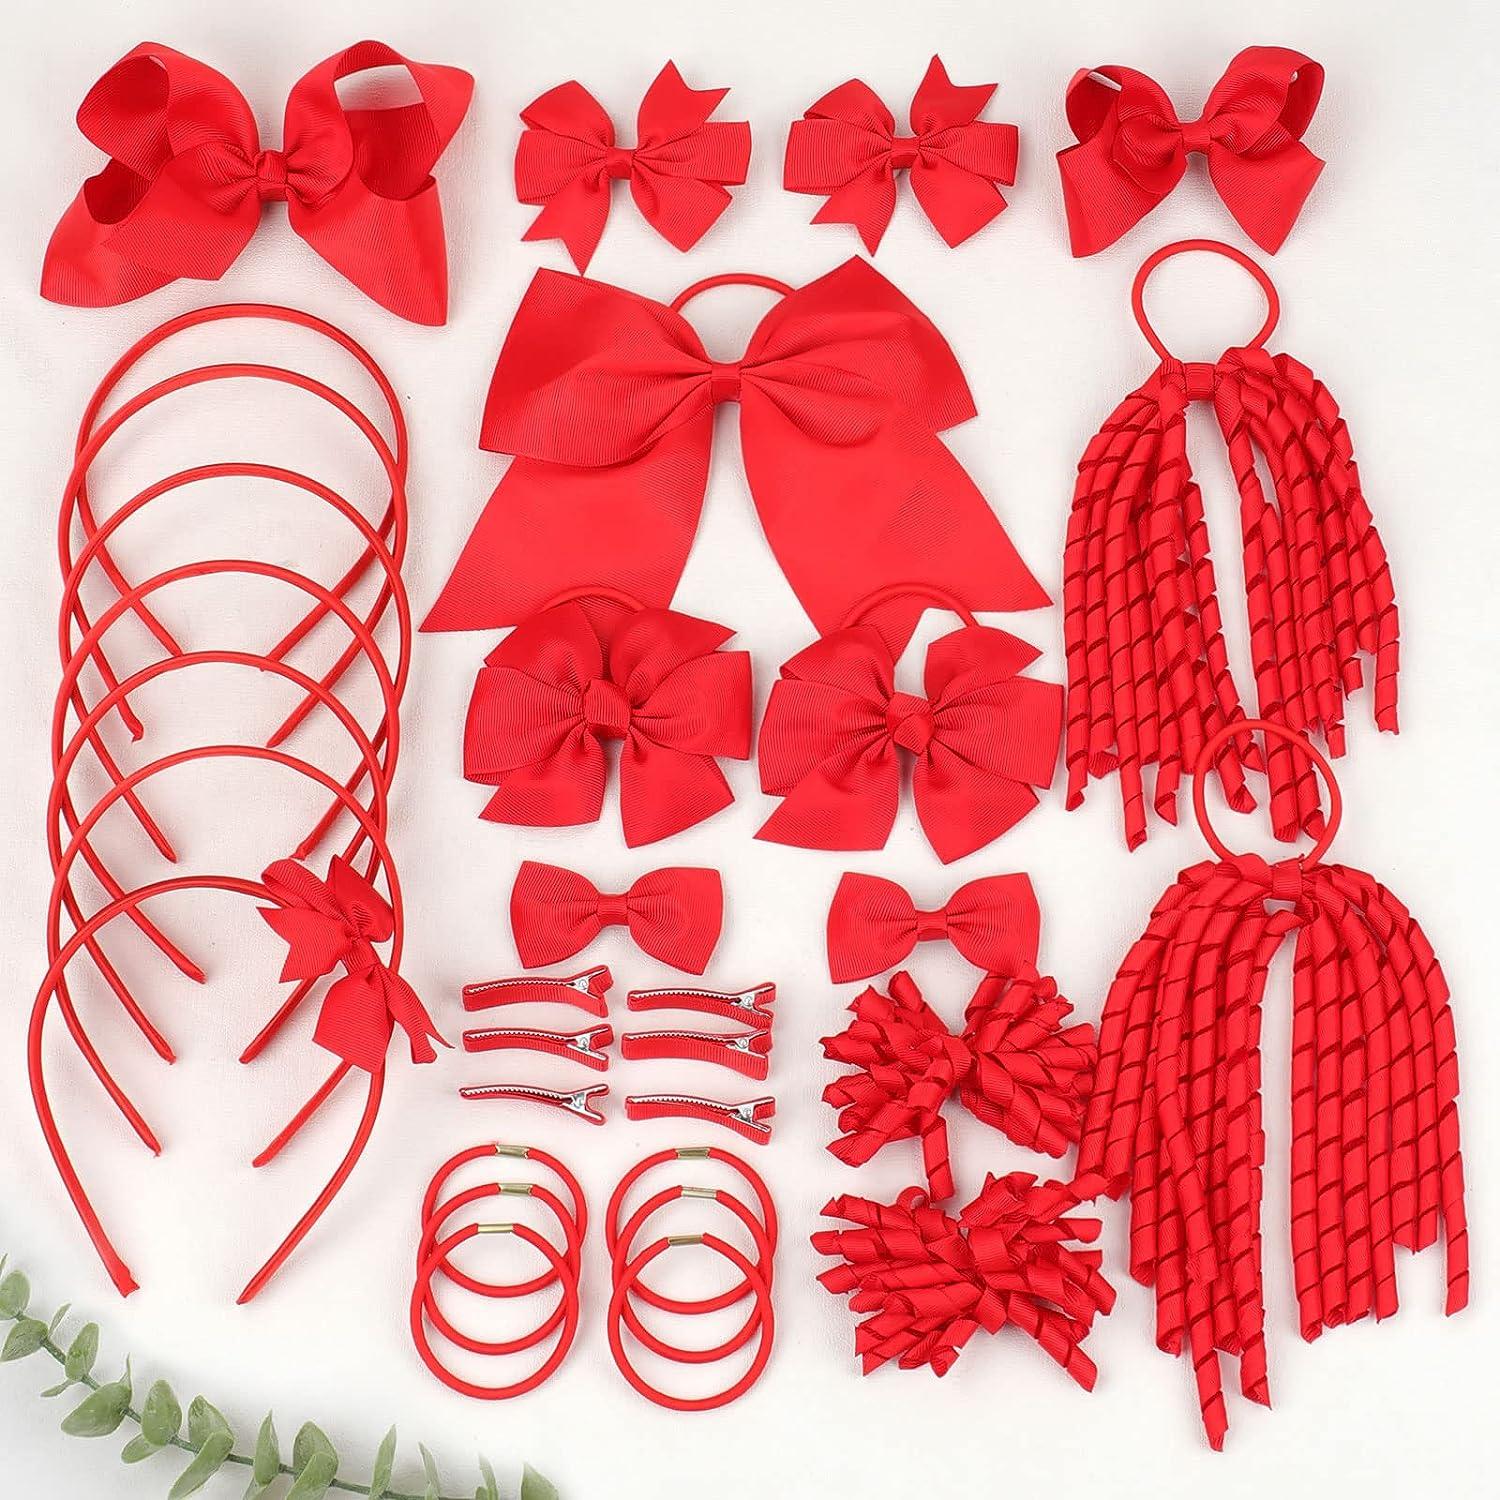 32PCS Red Bows for Girls Oaoleer Grosgrain Ribbon Red Hair Accessories Set  Include Hair Bows Cheer Bows Alligator Hair Clips Curly Koker Bows Bows Hair  Tie Hair Barrettes Headbands for Little Girls